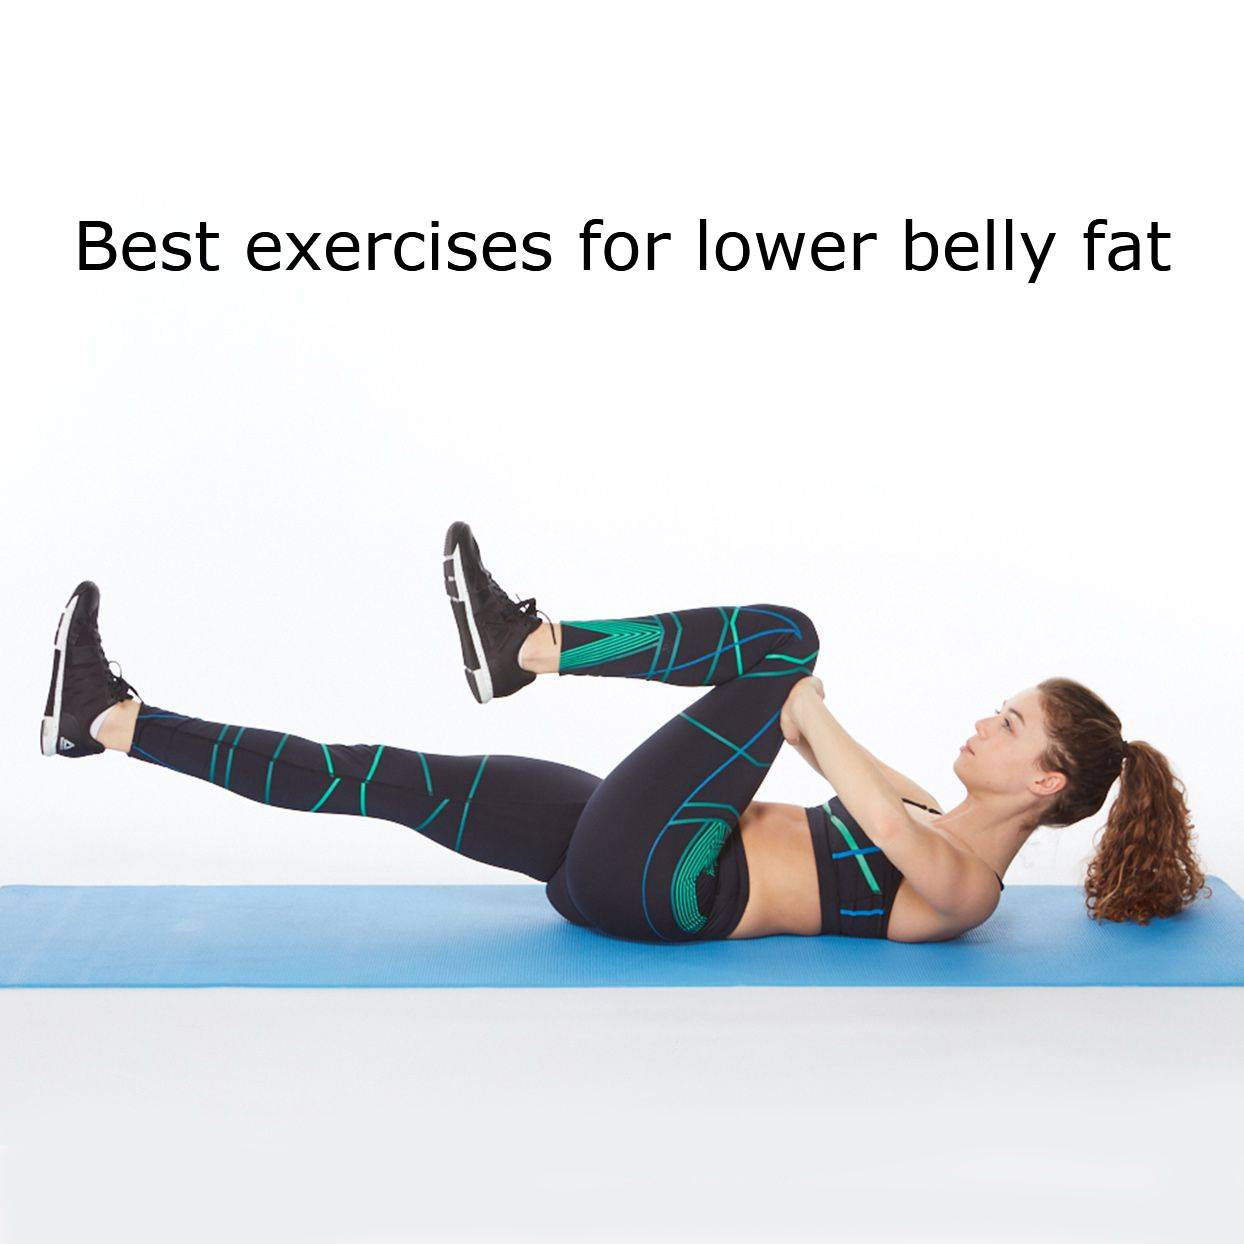 These are the best exercises to get rid of fat in the lower belly